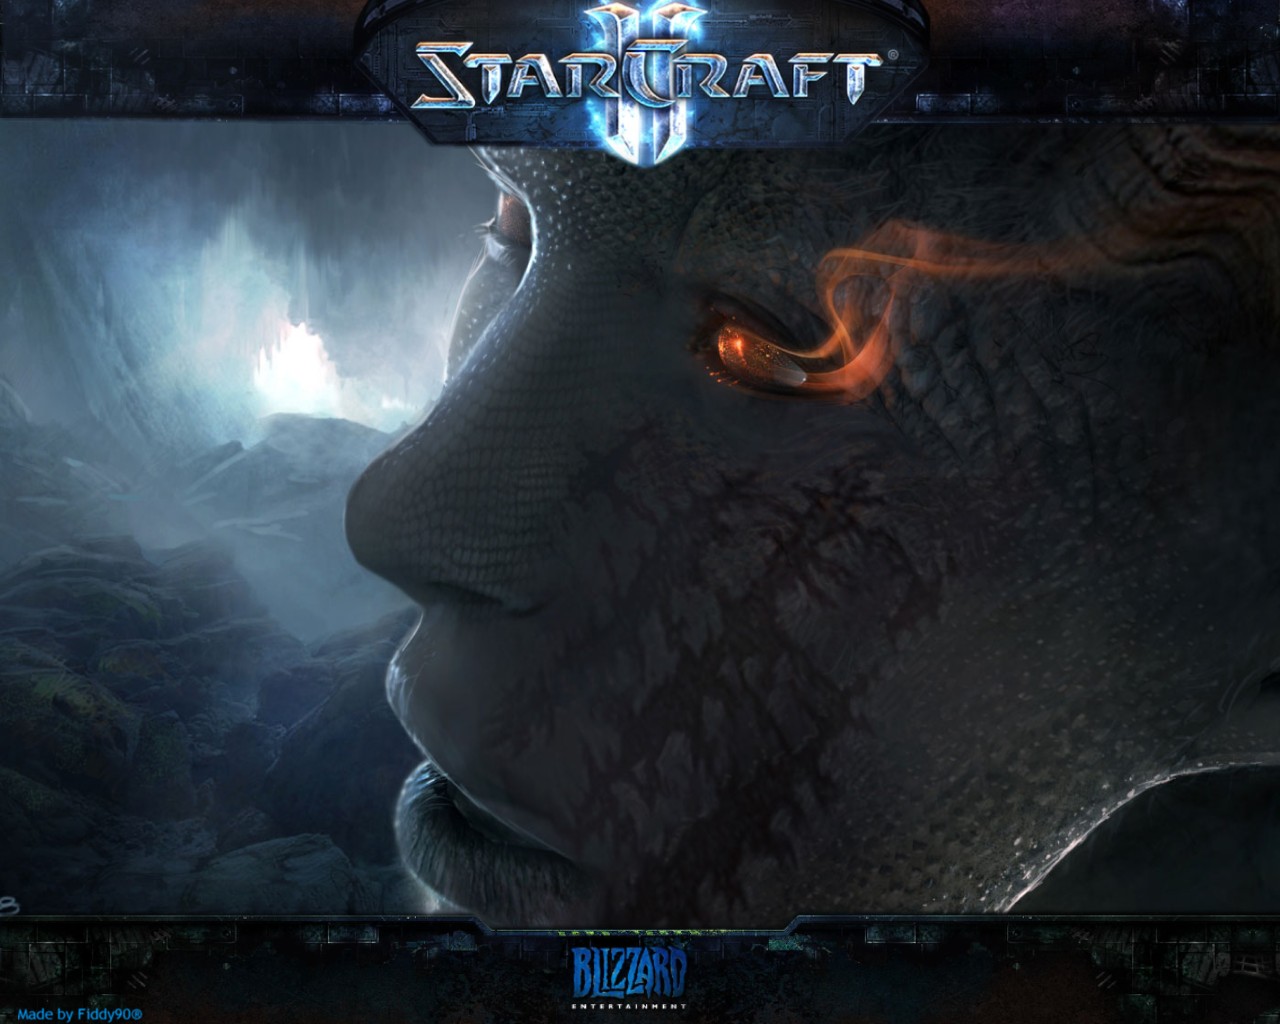 Cool Starcraft Wallpaper And Background The Design Work